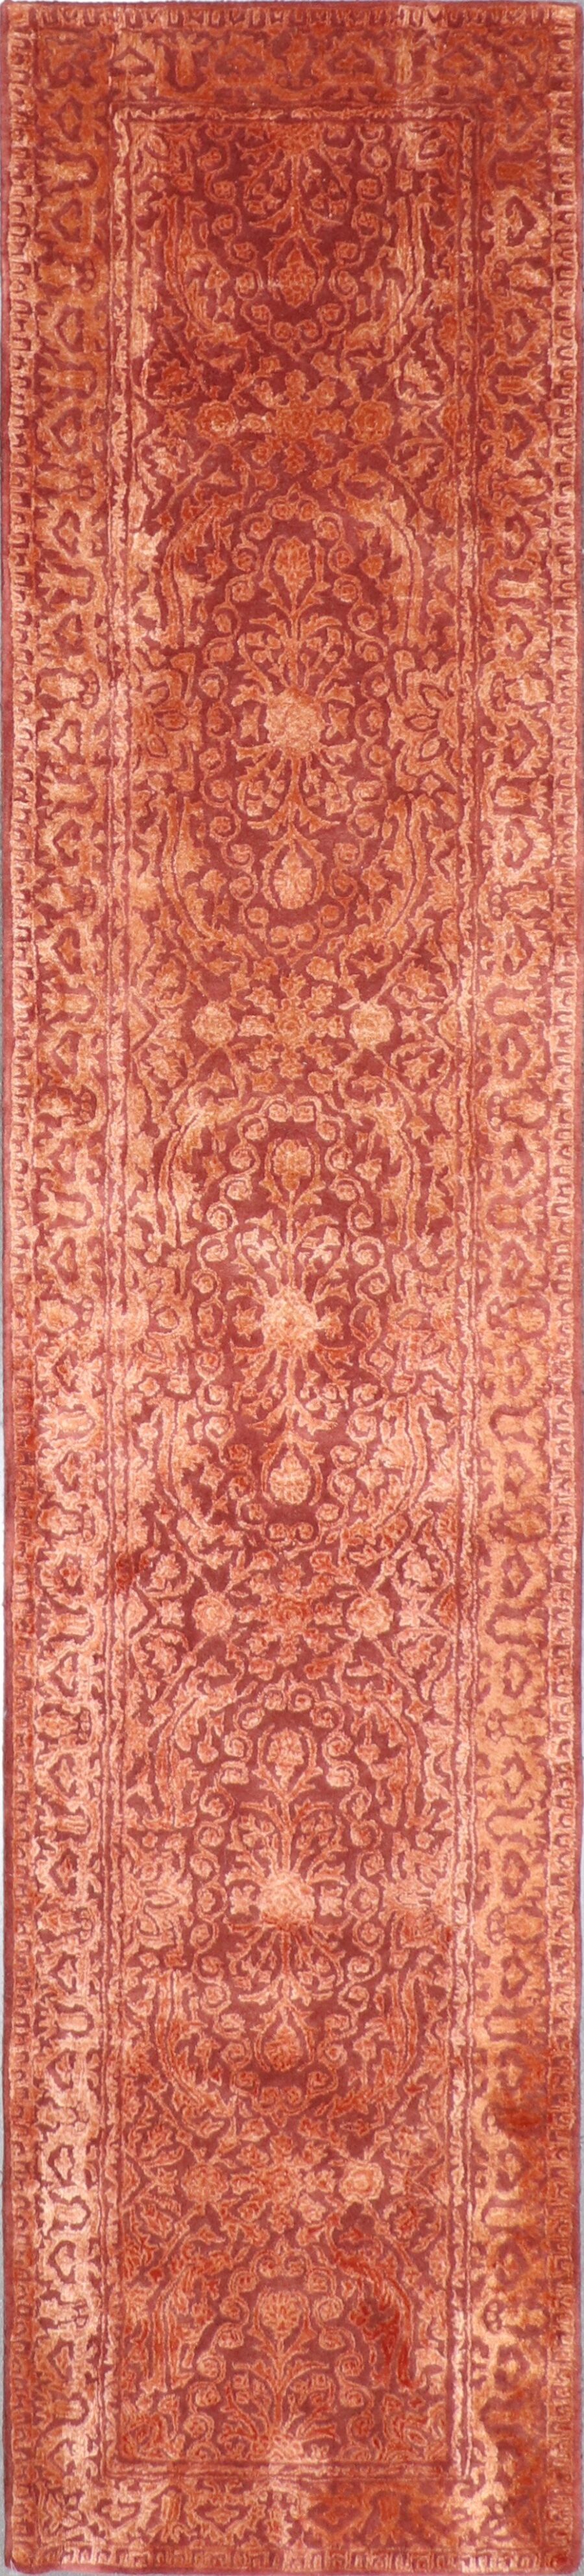 2'6"x9'8" Transitional Wool & Silk Hand-Tufted Rug - Direct Rug Import | Rugs in Chicago, Indiana,South Bend,Granger